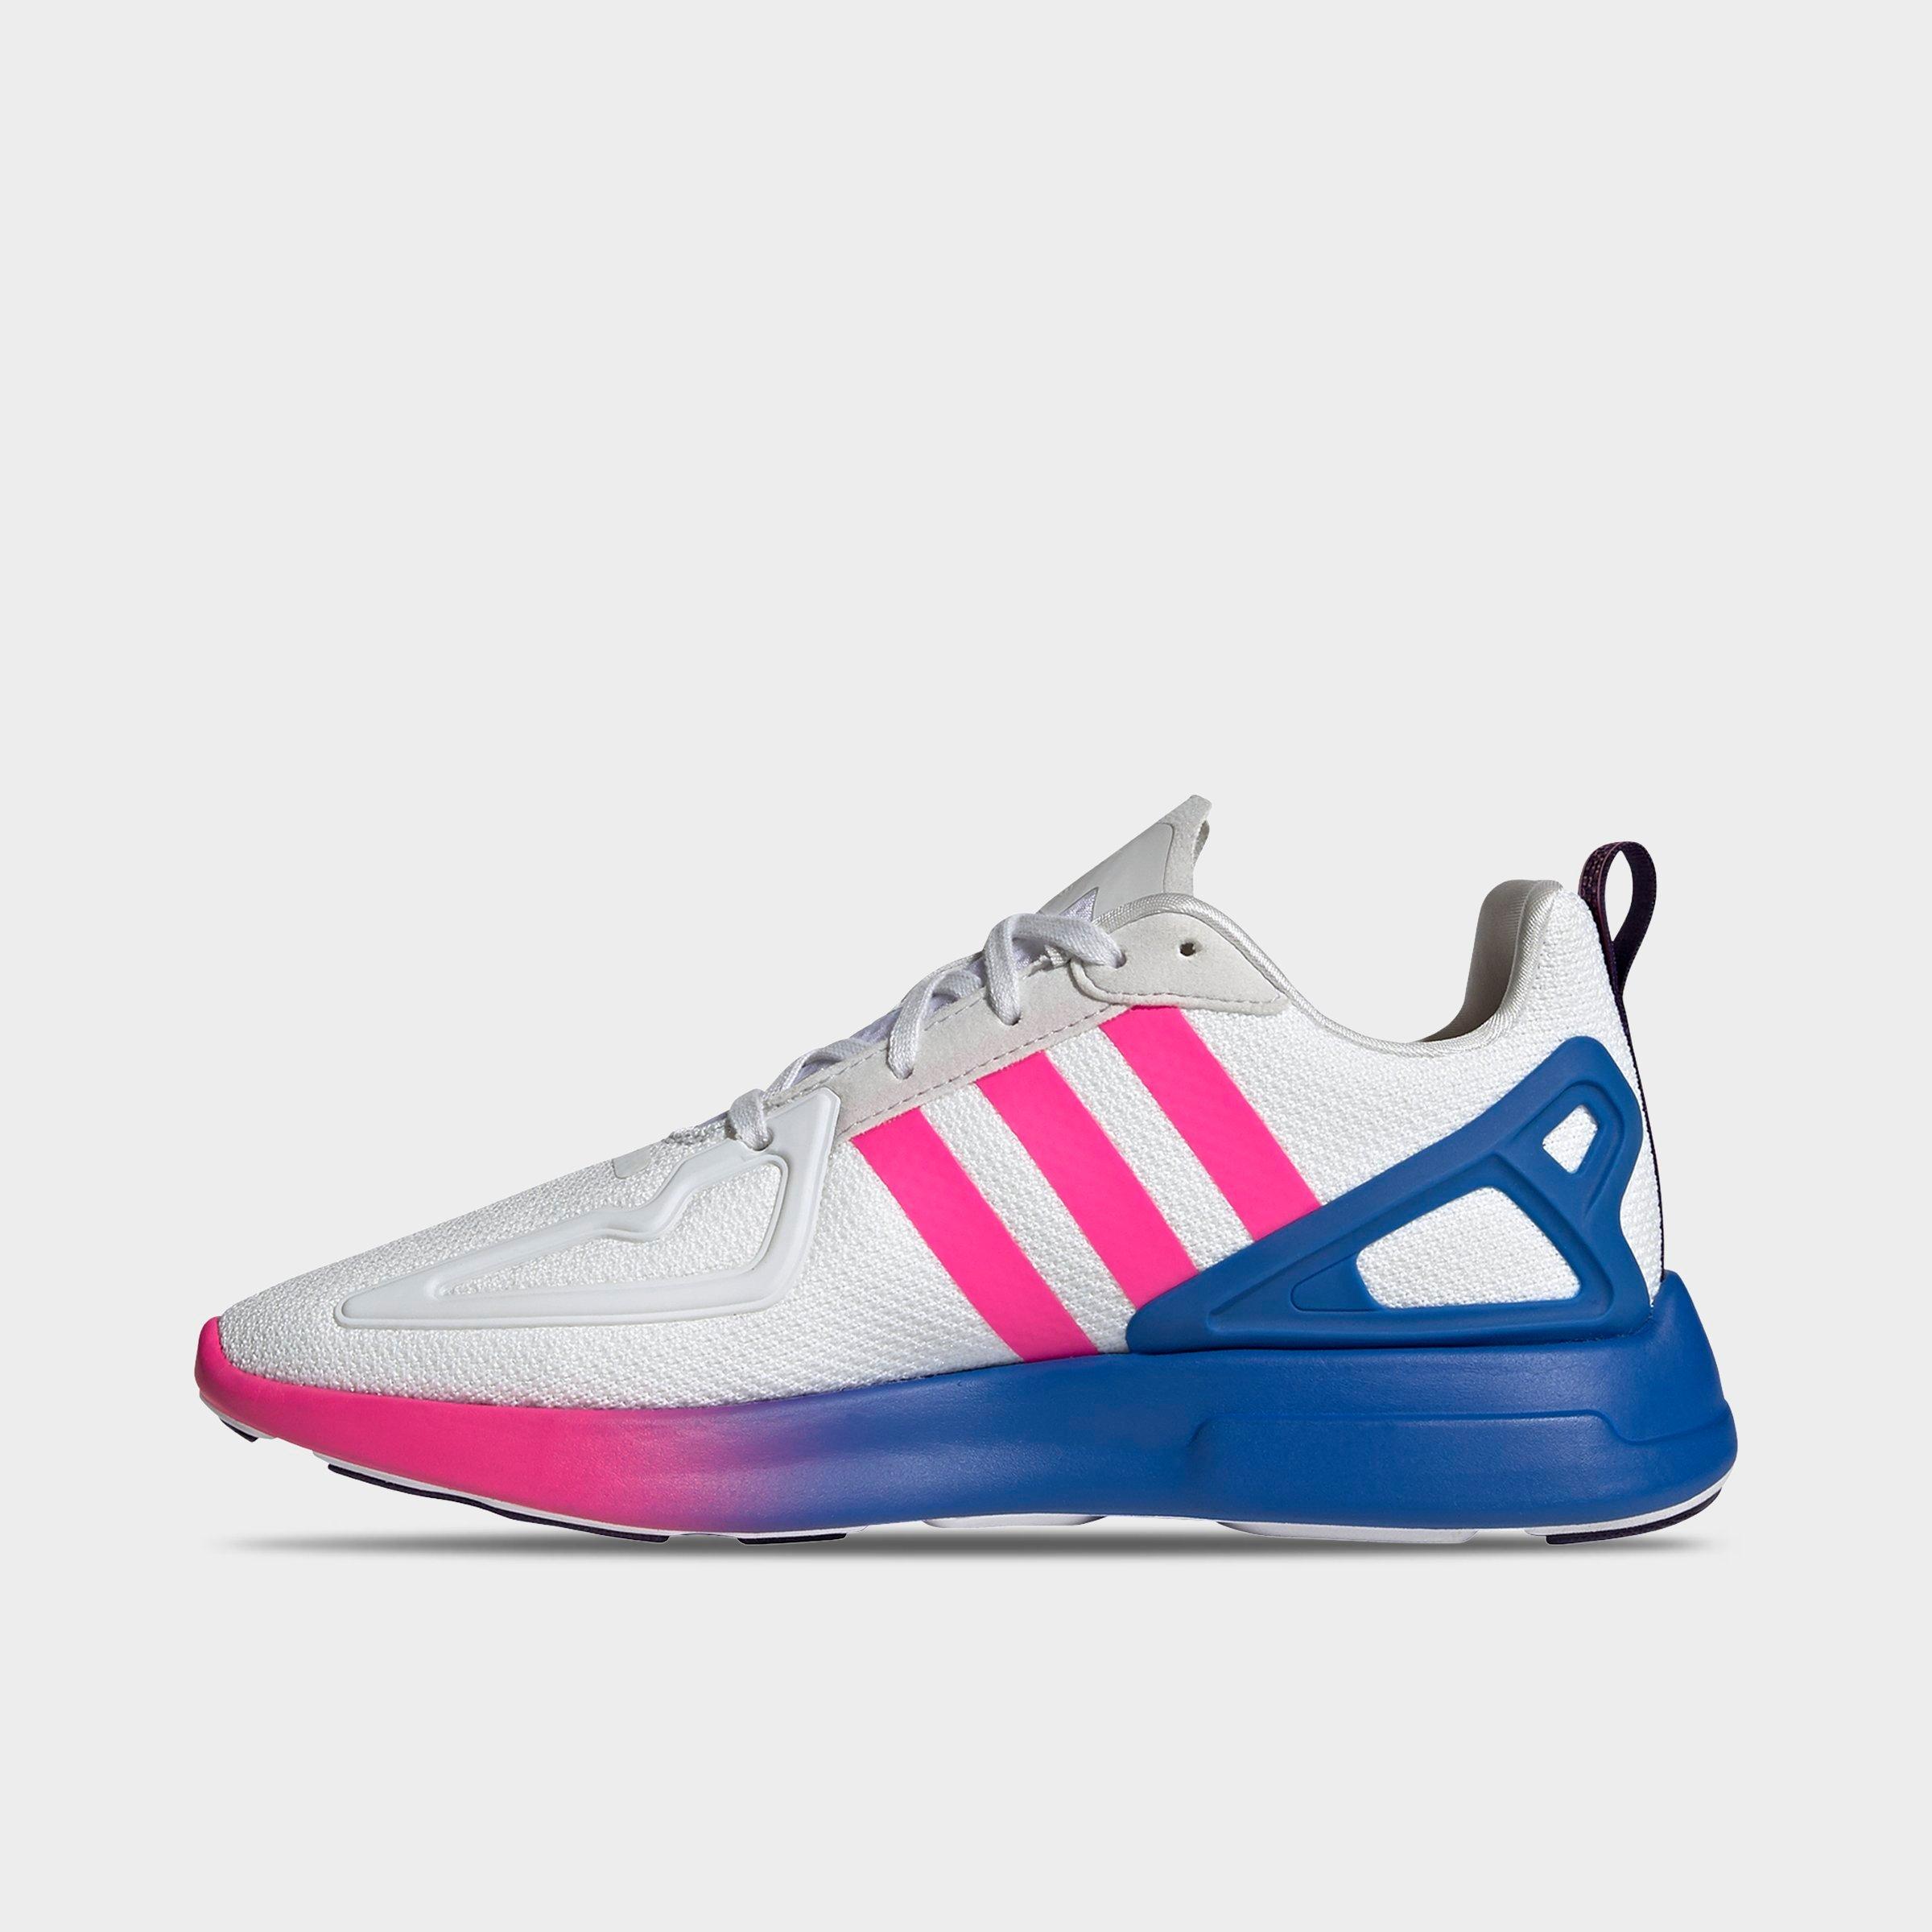 adidas shoes new collection